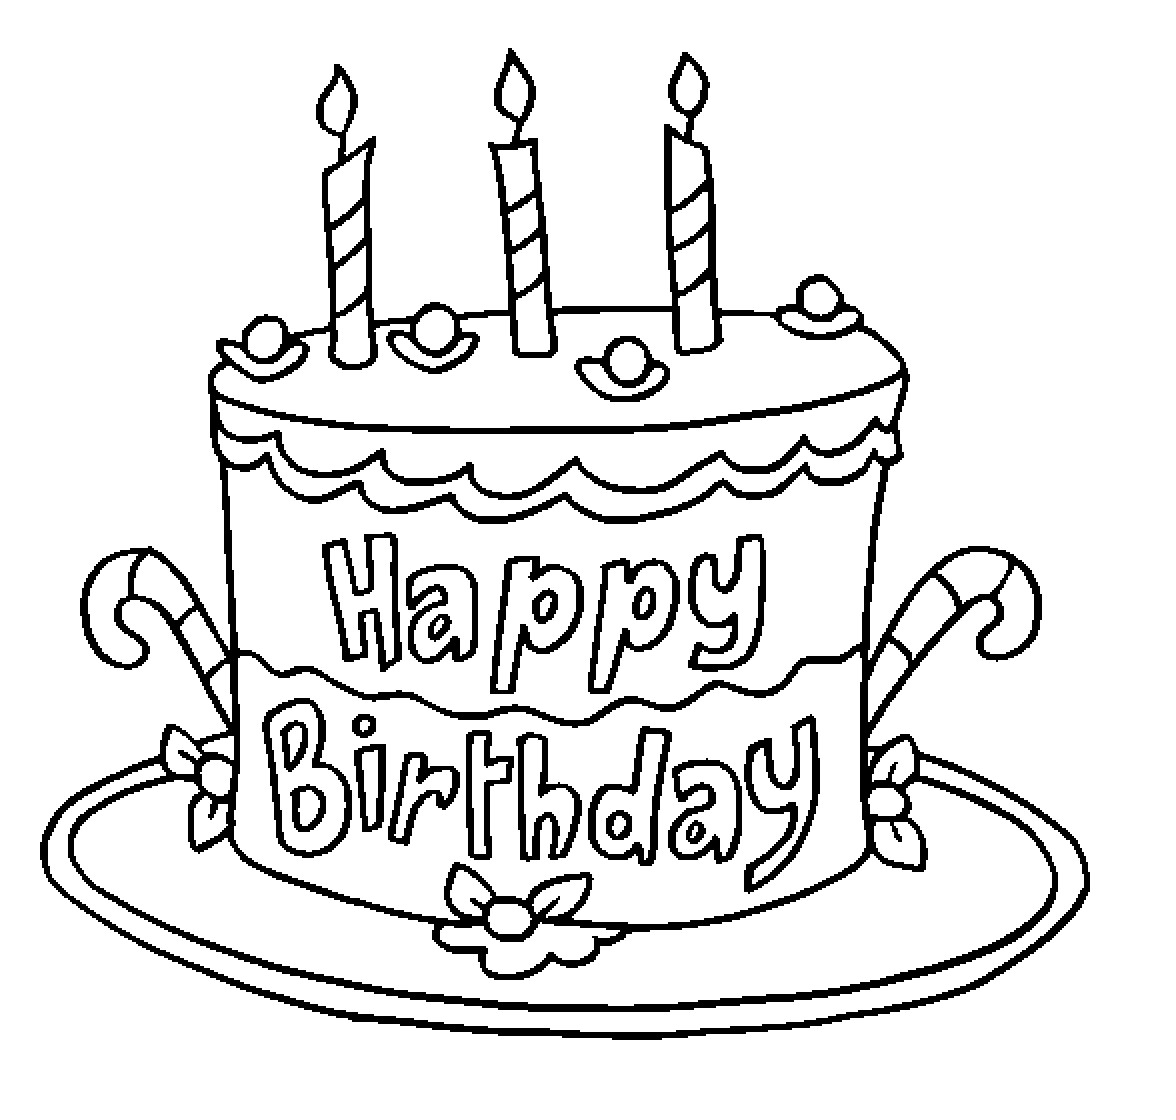 Birthday Cake Coloring Page
 Birthday cake slice drawing images and clip art